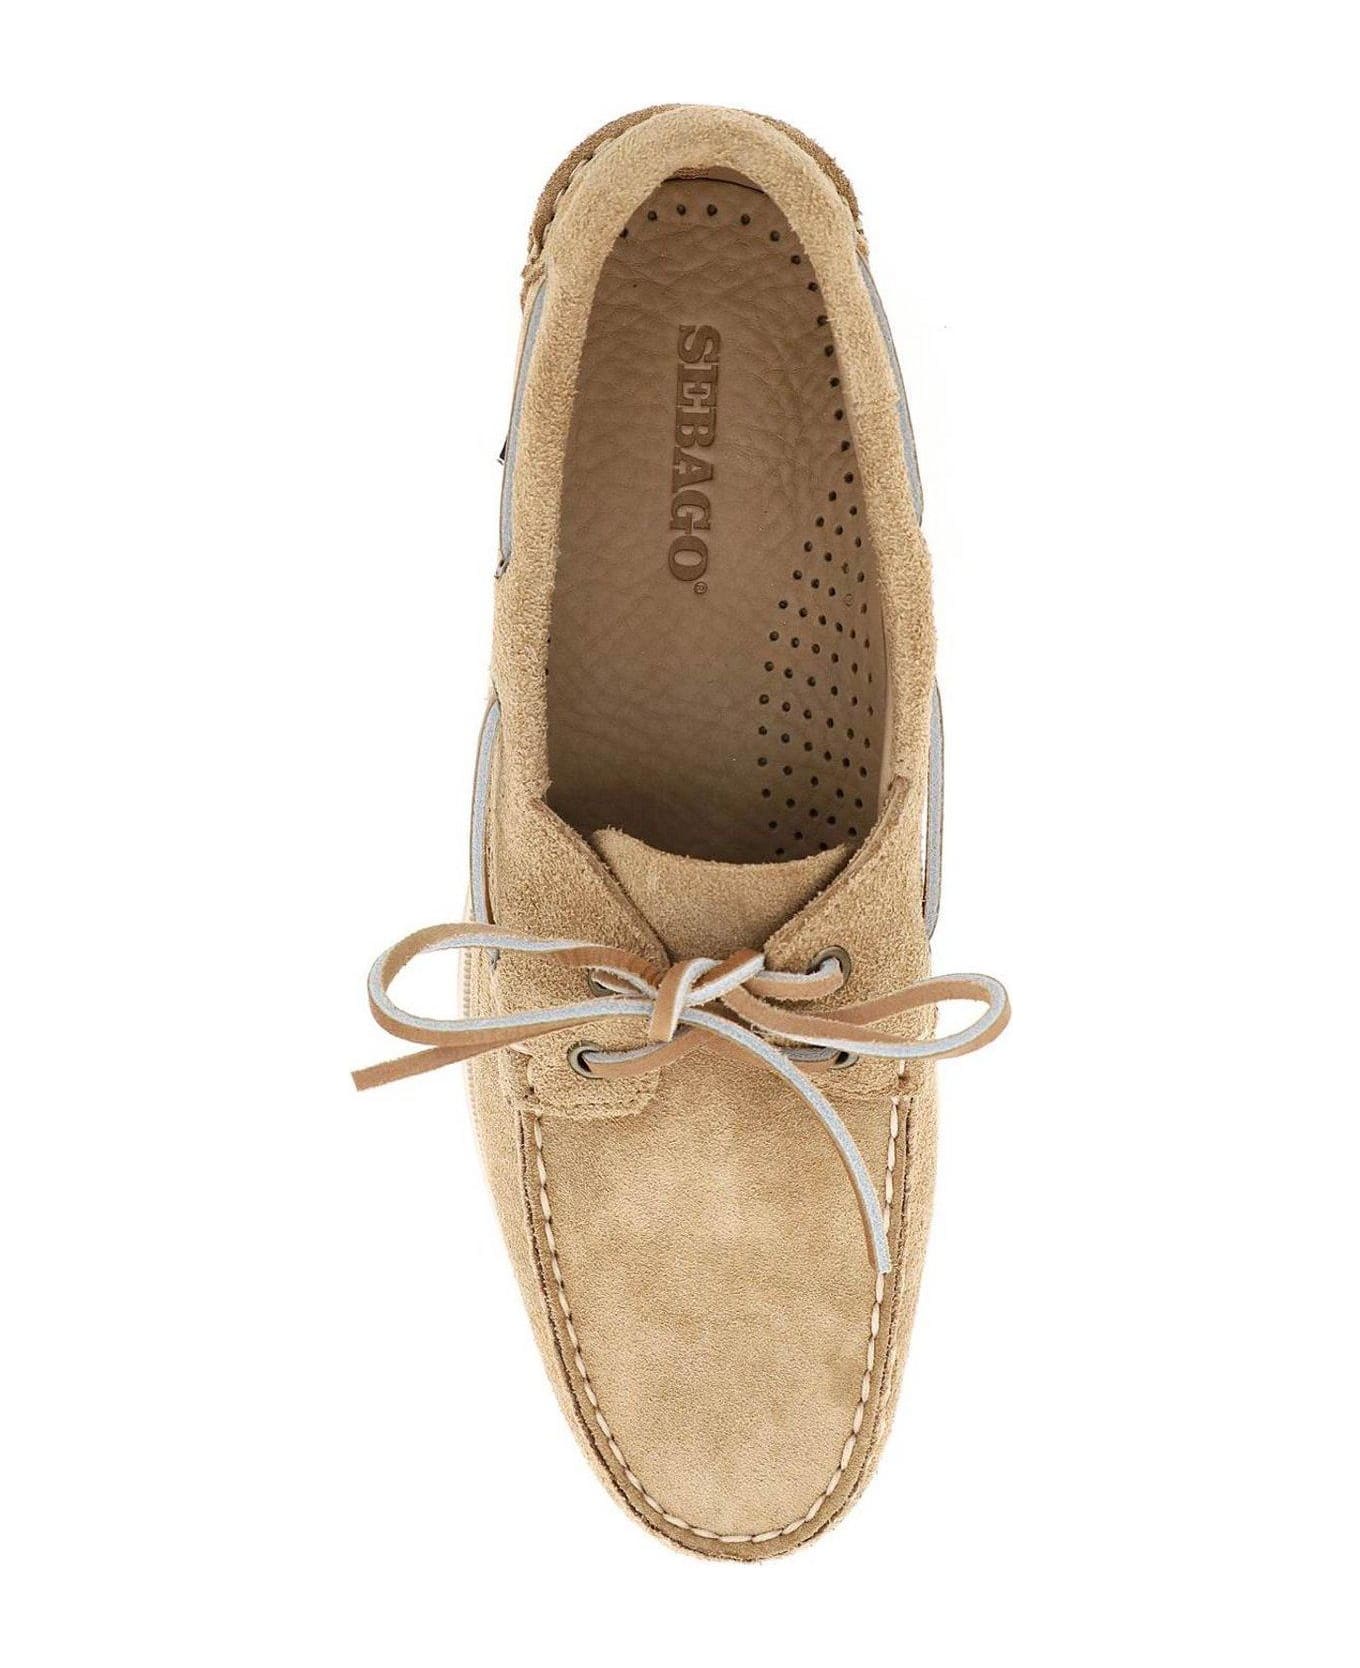 Sebago Lace-up Round Toe Boat Shoes - Beige Camel ローファー＆デッキシューズ